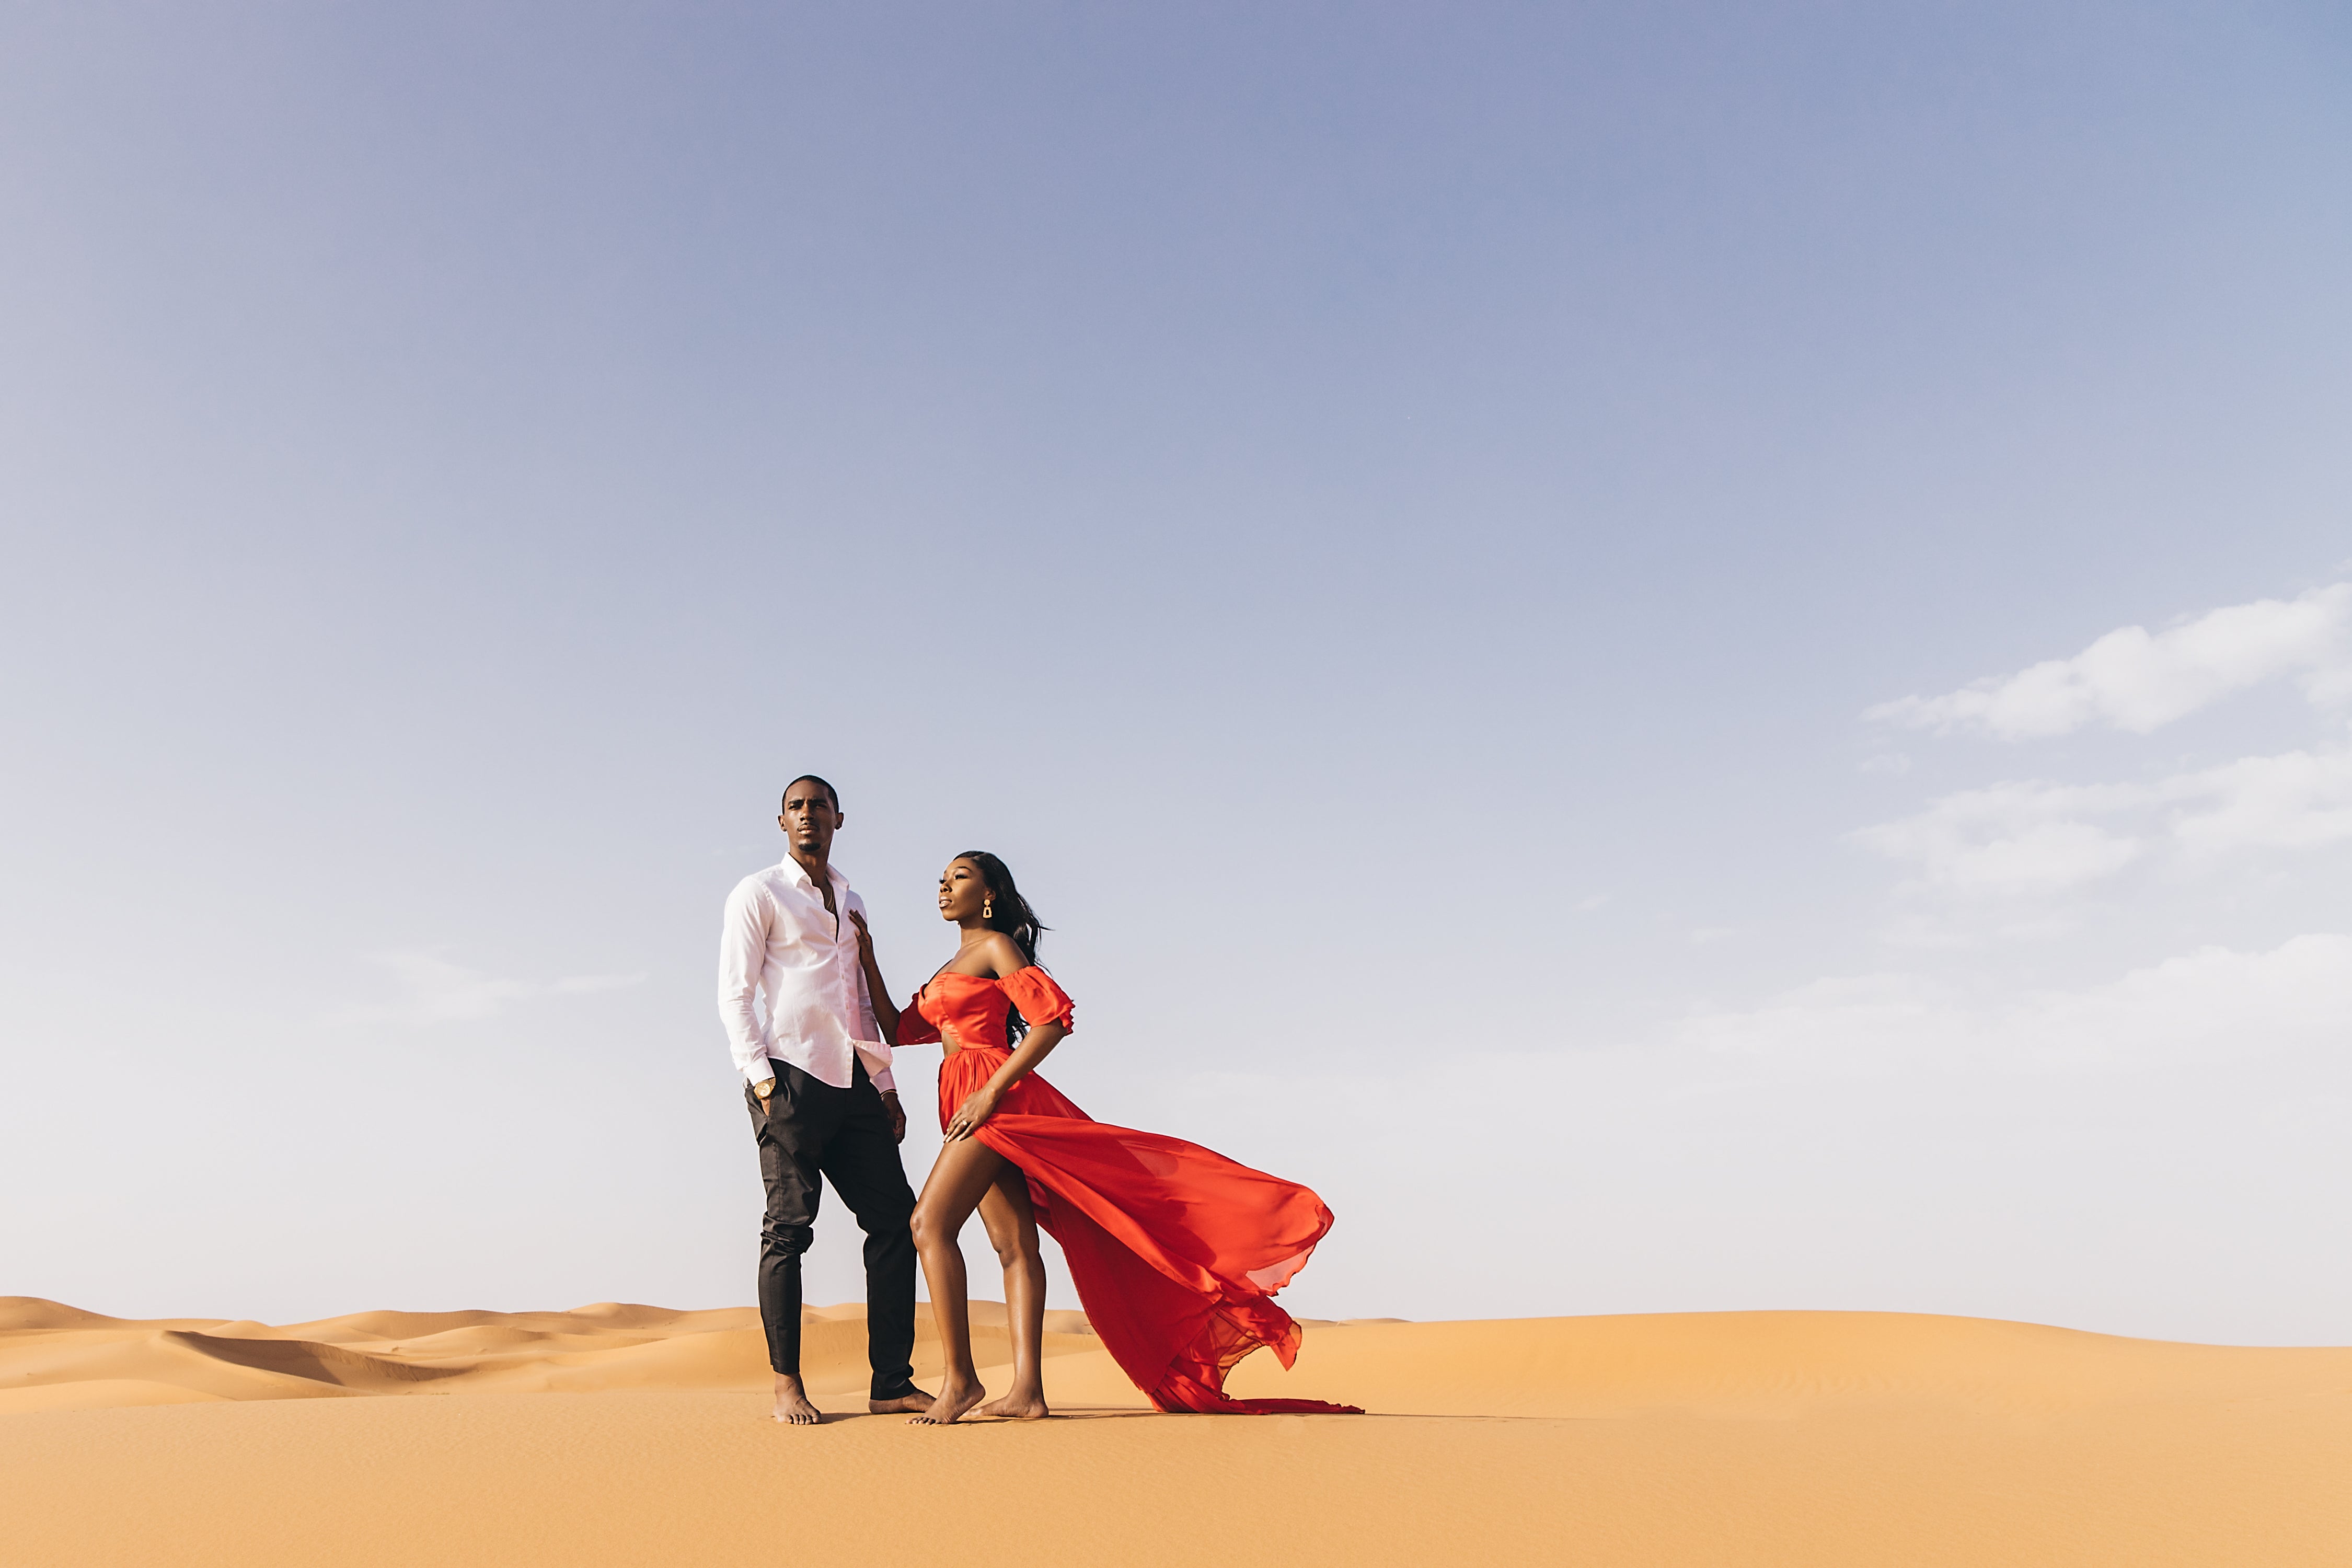 Black Wedding Moment Of The Day: We're Amazed At YouTubers Essie & Maurice's Desert Engagement Shoot